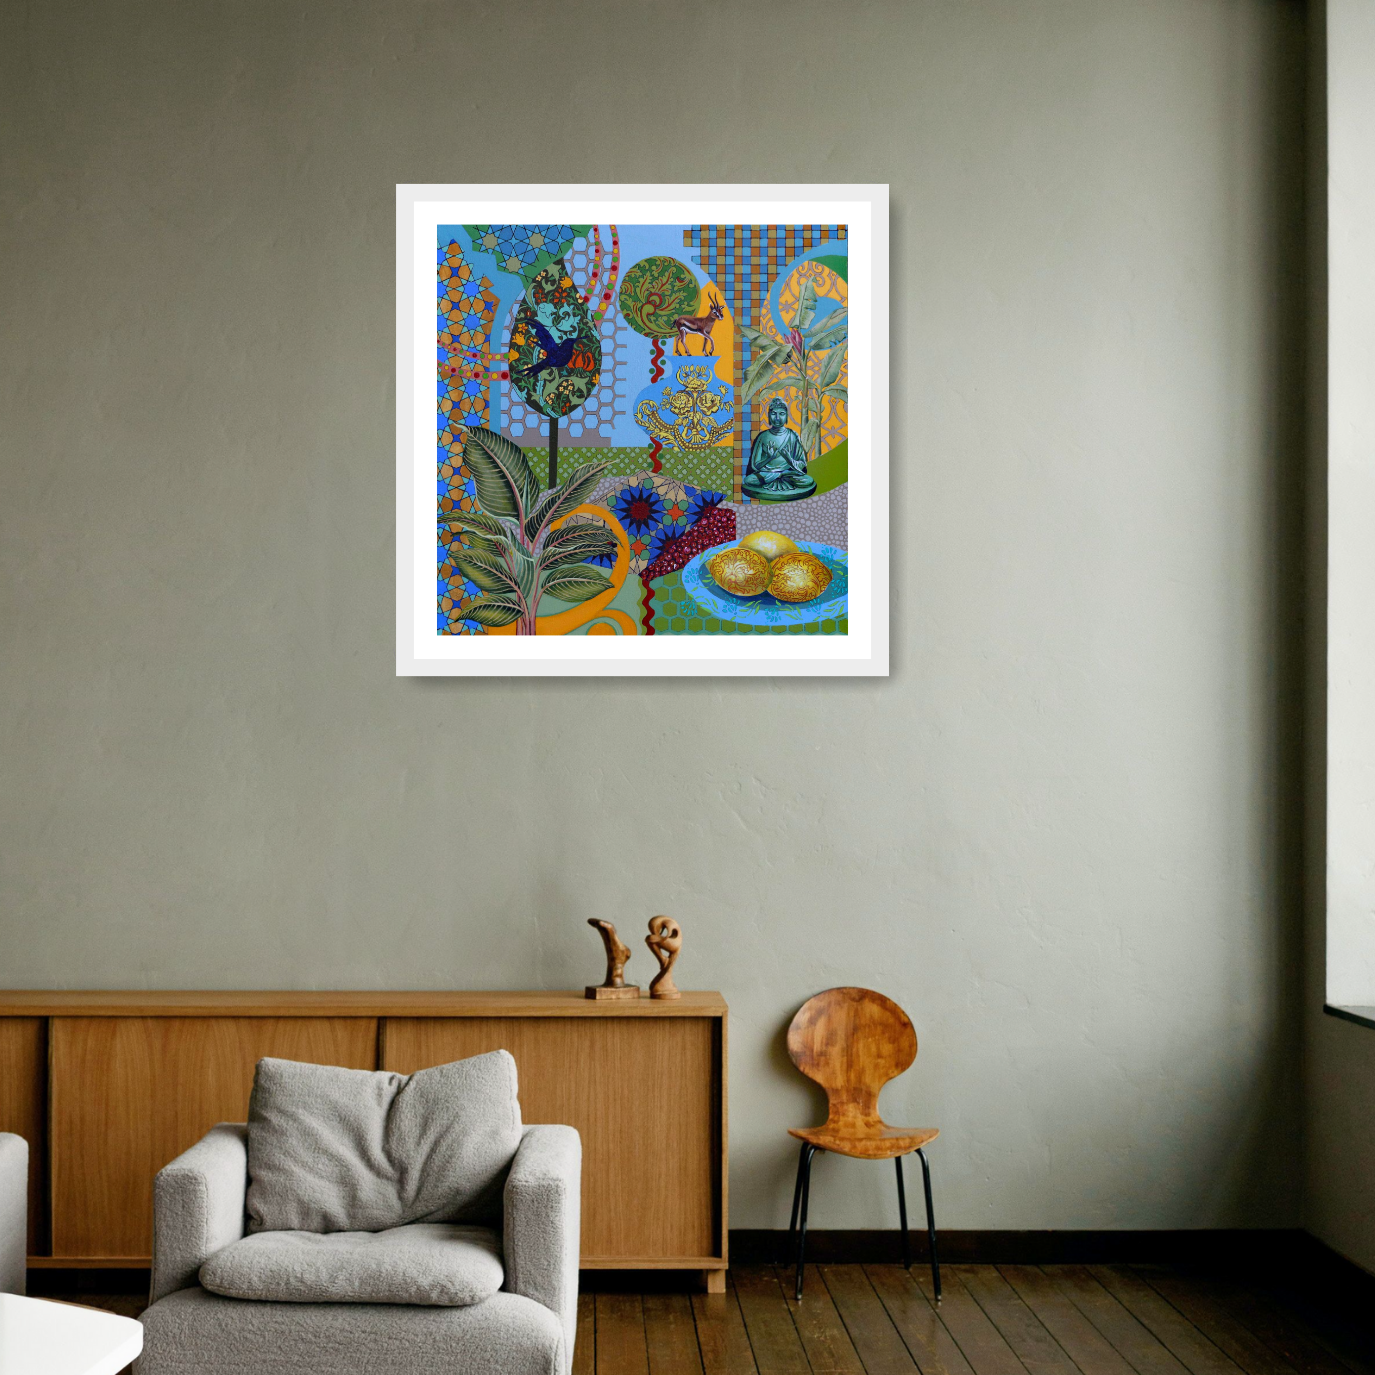 White framed Fine Art Print: 'Love of 3 Lemons, 2020' by Frances Ferdinands is a contemporary masterpiece featuring vibrant colours and whimsical imagery of lemons, antelopes, and trees. This captivating artwork blends elements of Buddhism with modern symbolism, adding a unique touch to any space.